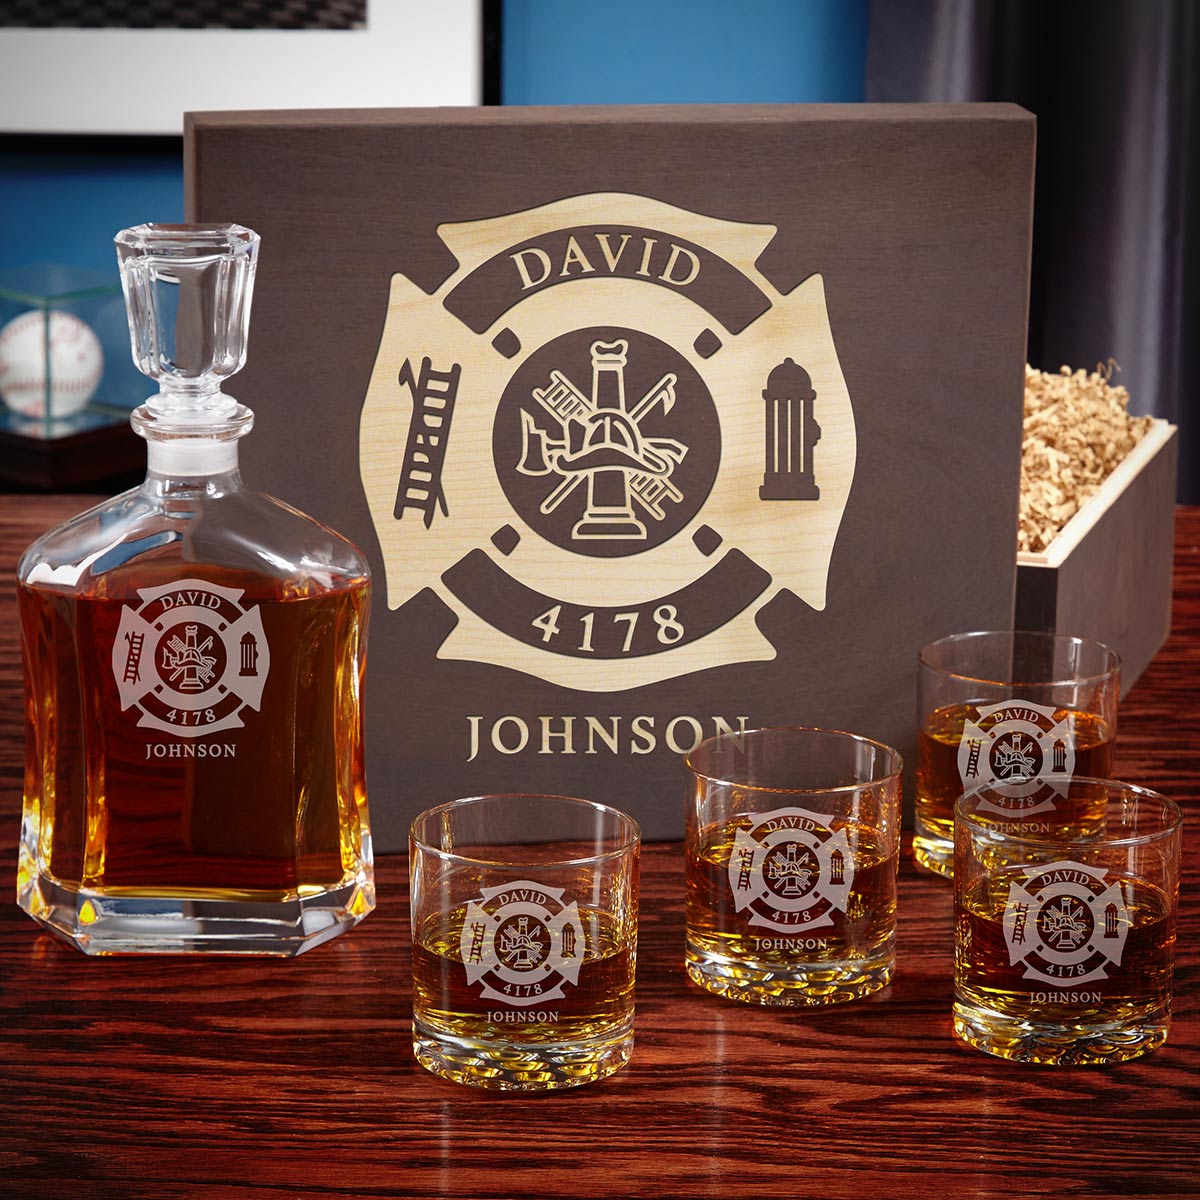 Engraved Firefighter Liquor Decanter Set with Whiskey Glasses - Handcrafted Box